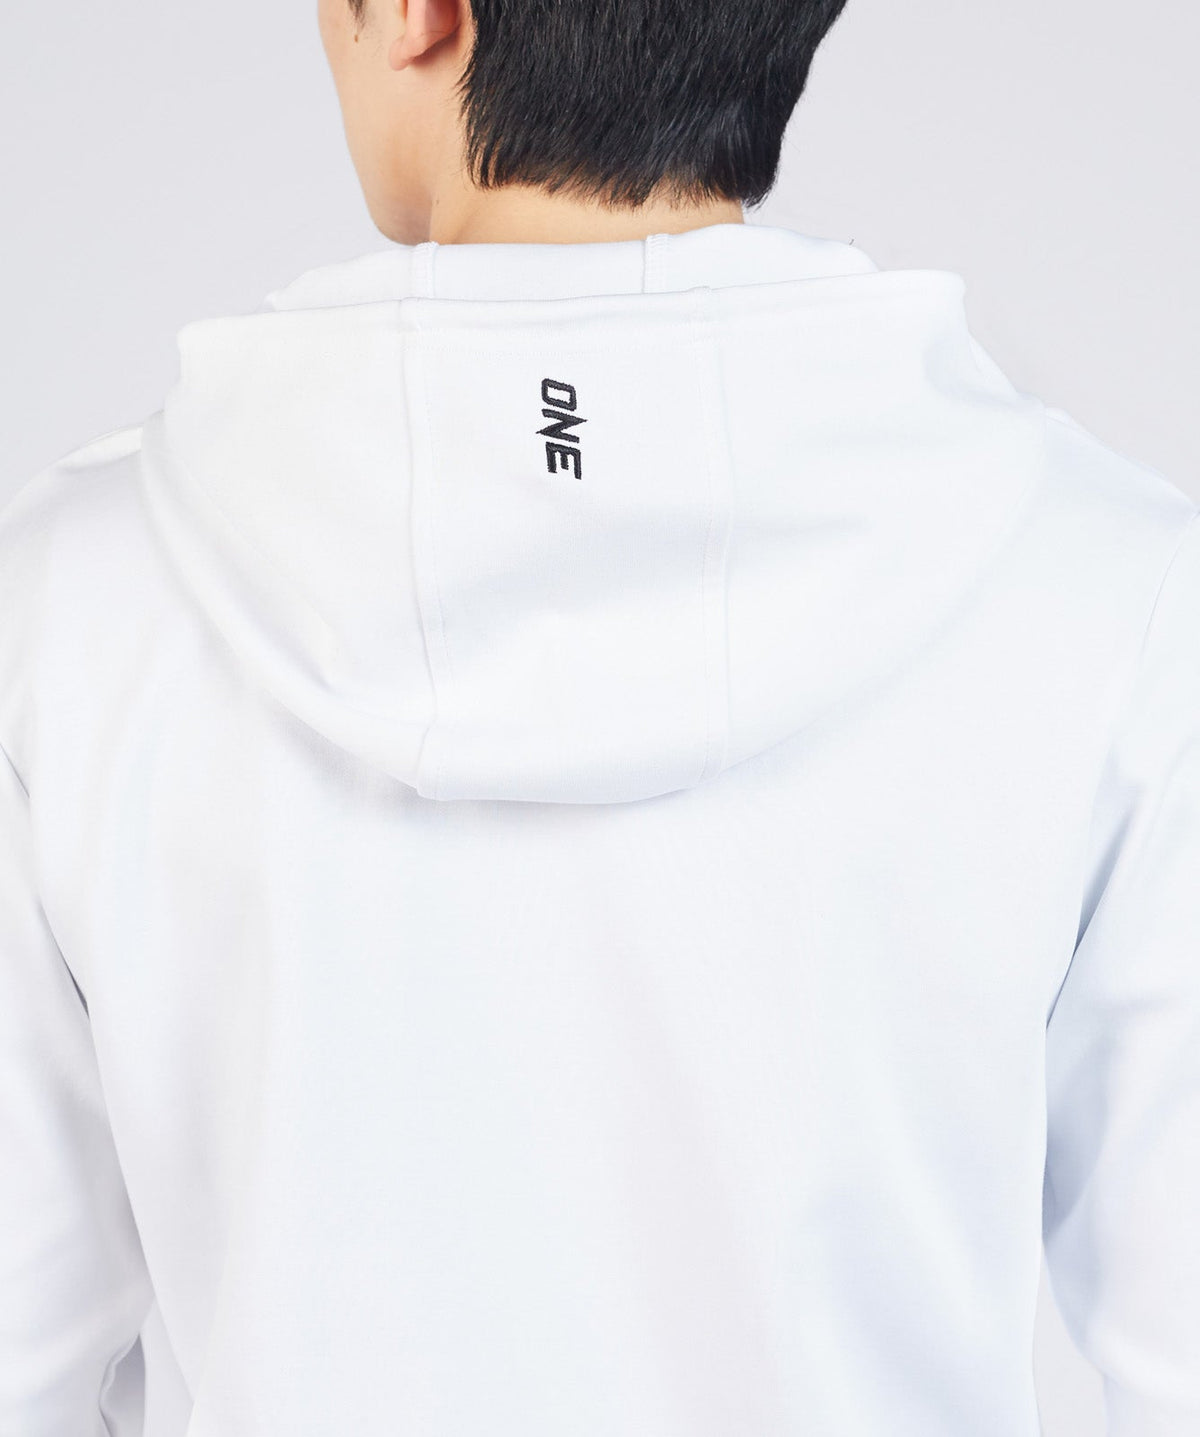 ONE Walkout Zip Hoodie (White), ONE Championship – ONE.SHOP Thailand